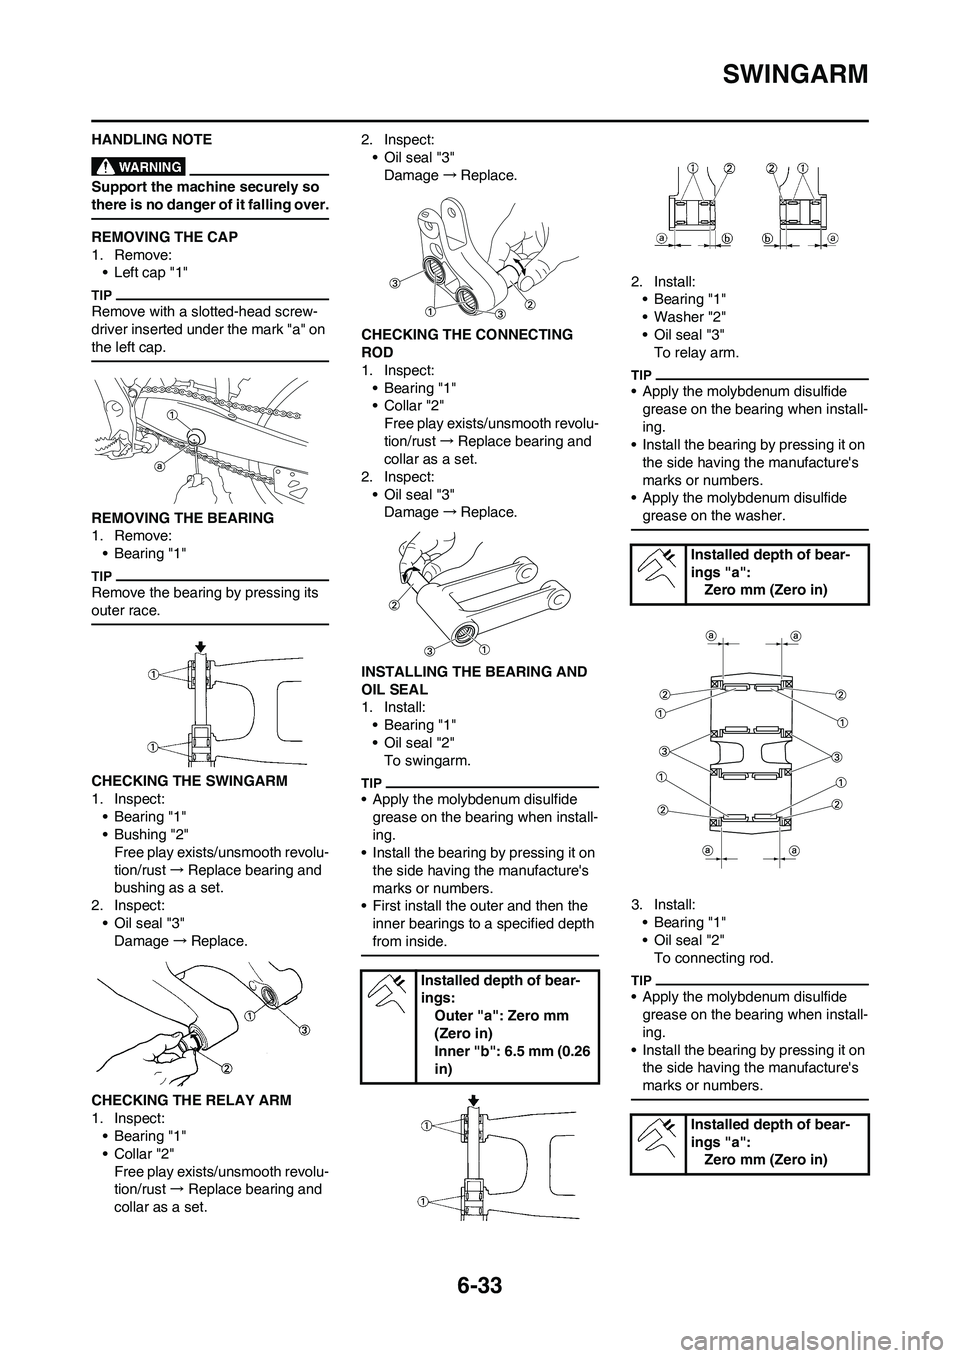 YAMAHA WR 450F 2011  Owners Manual 6-33
SWINGARM
HANDLING NOTE
Support the machine securely so 
there is no danger of it falling over.
REMOVING THE CAP
1. Remove:
• Left cap "1"
Remove with a slotted-head screw-
driver inserted under